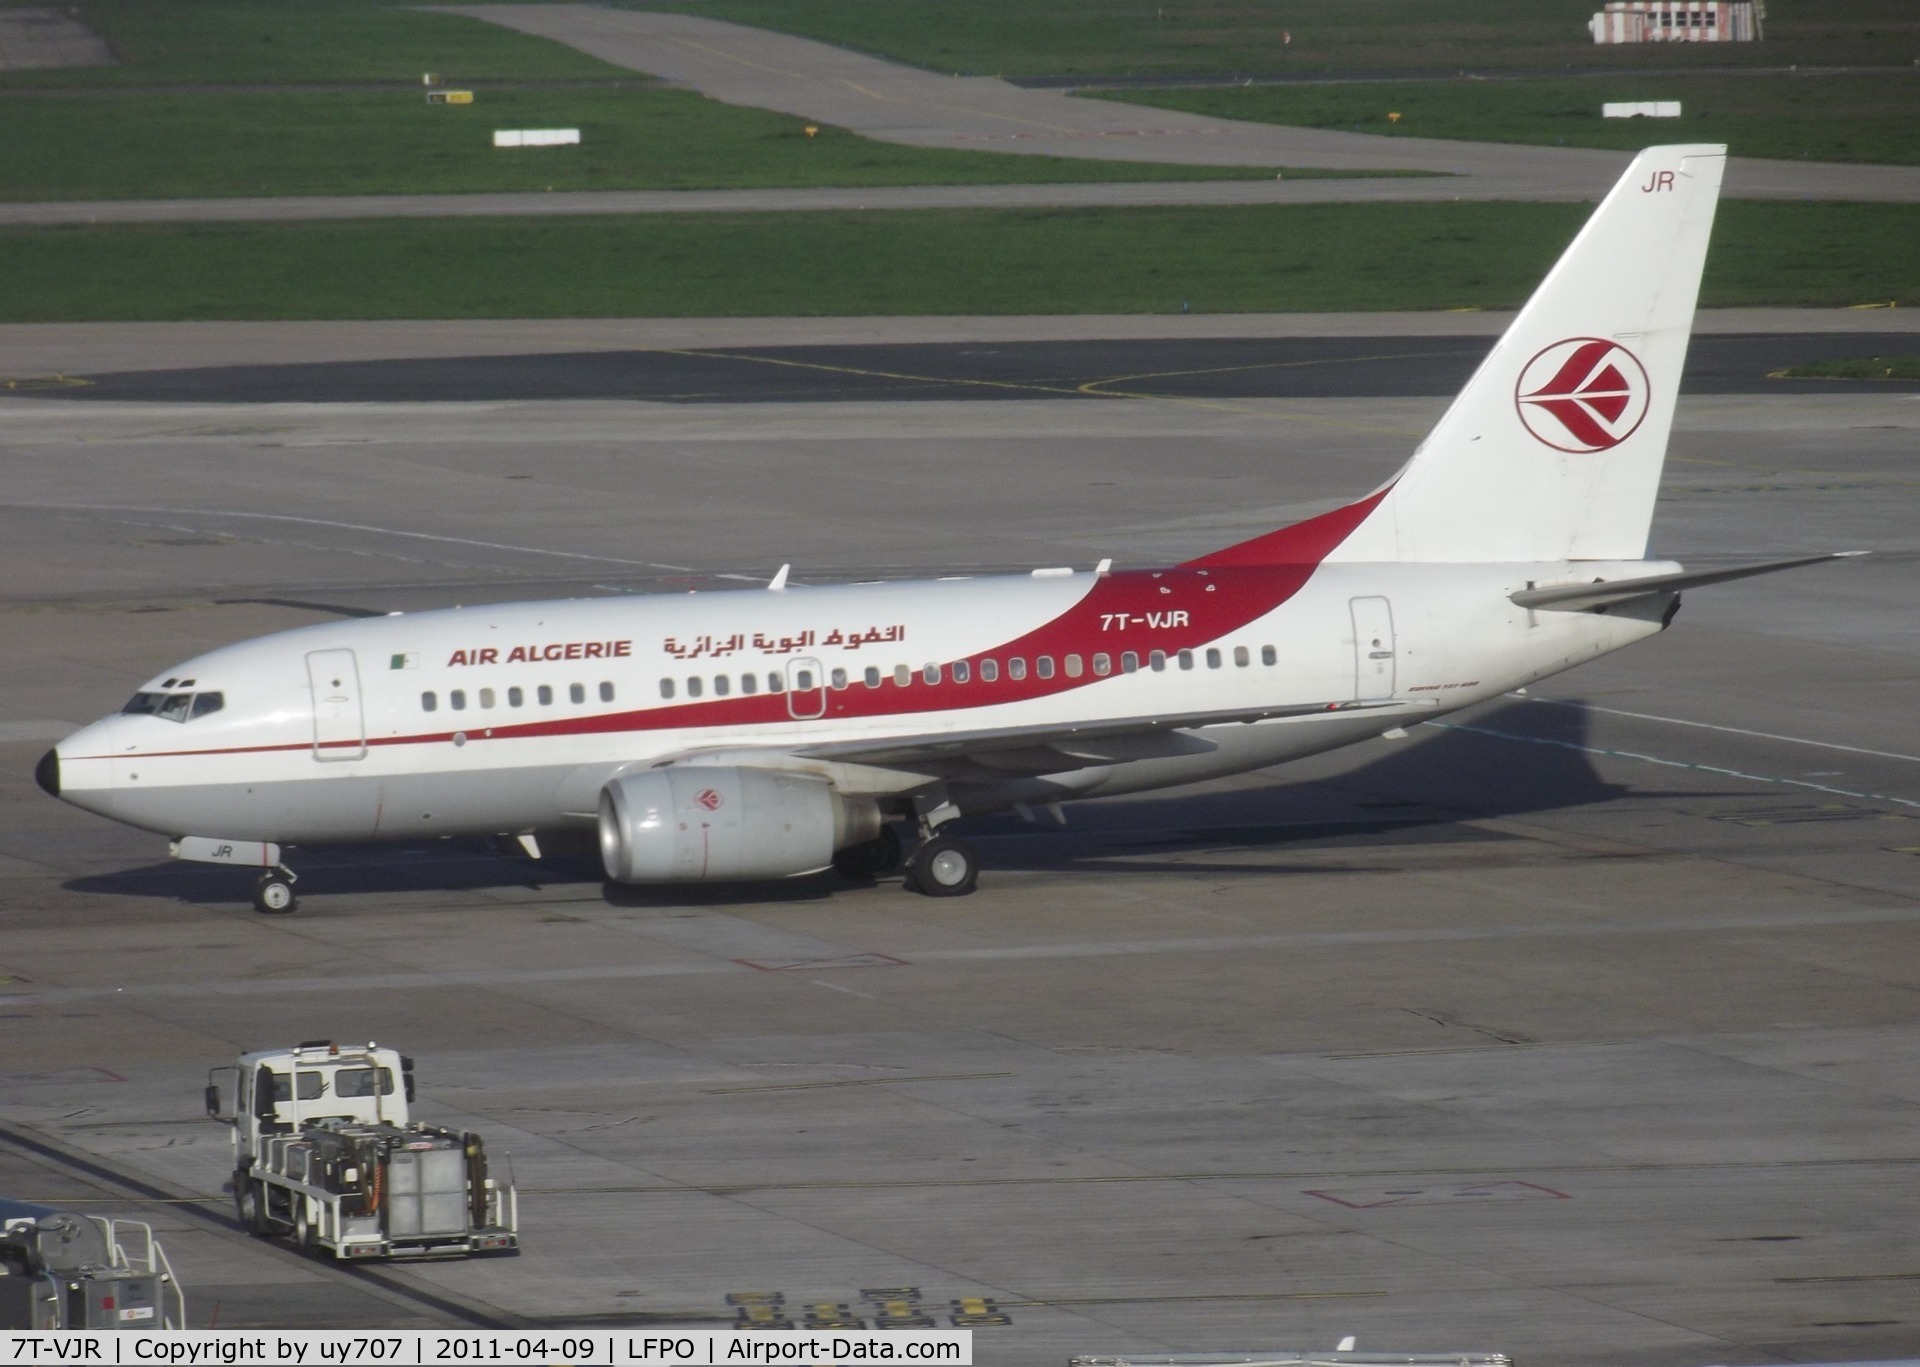 7T-VJR, 2002 Boeing 737-6D6 C/N 30545, was seconds to dock at South Terminal when posing for the camera